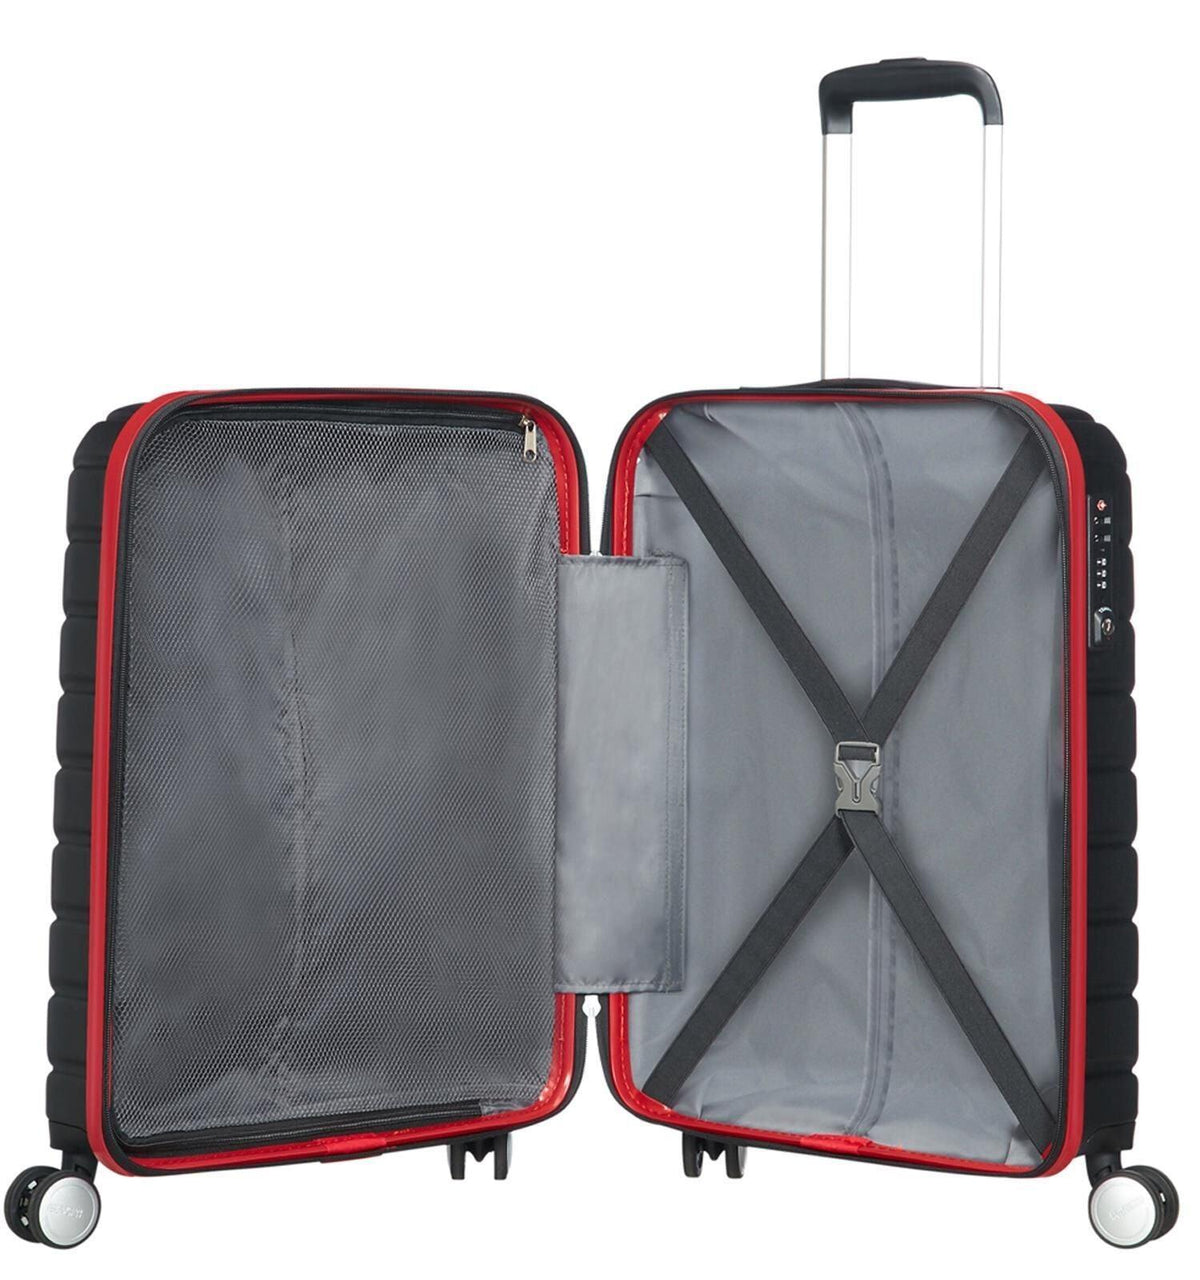 American Tourister 24in Black Suit Case - Choice Stores